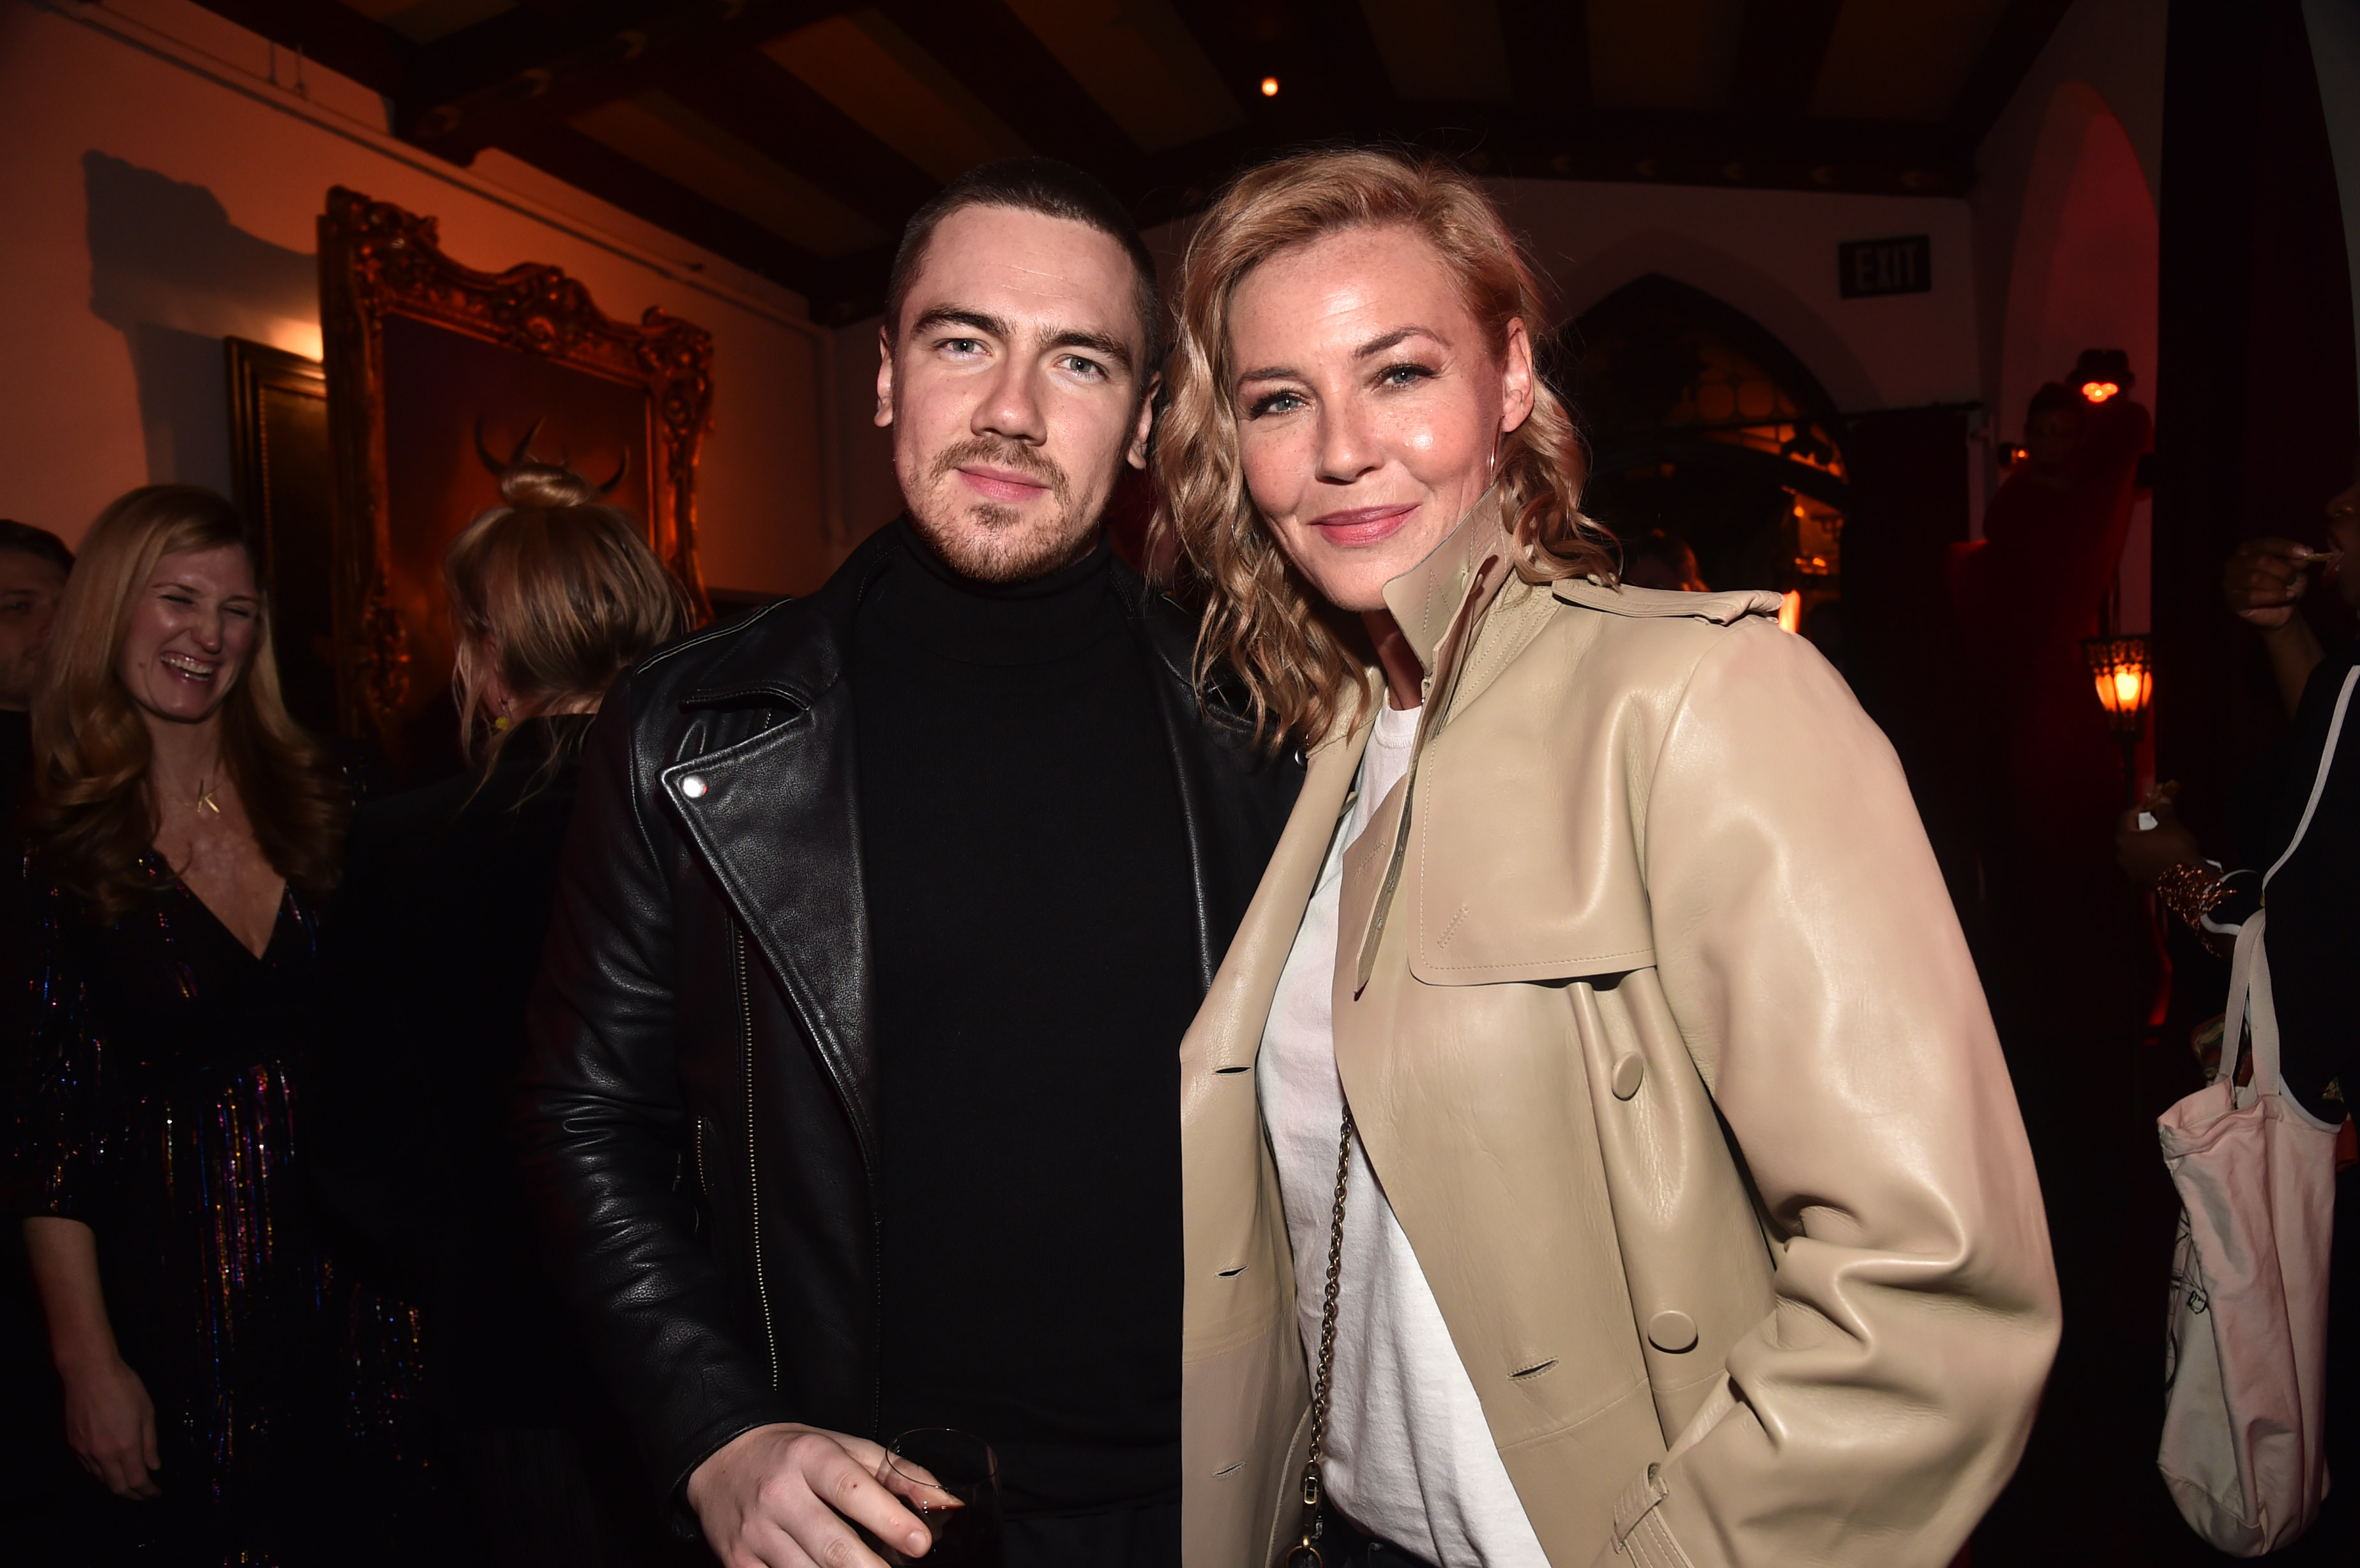 Sebastian Sartor and Connie Nielsen at the "I Am The Night" premiere after party on January 24, 2019, in Los Angeles, California. | Source: Getty Images